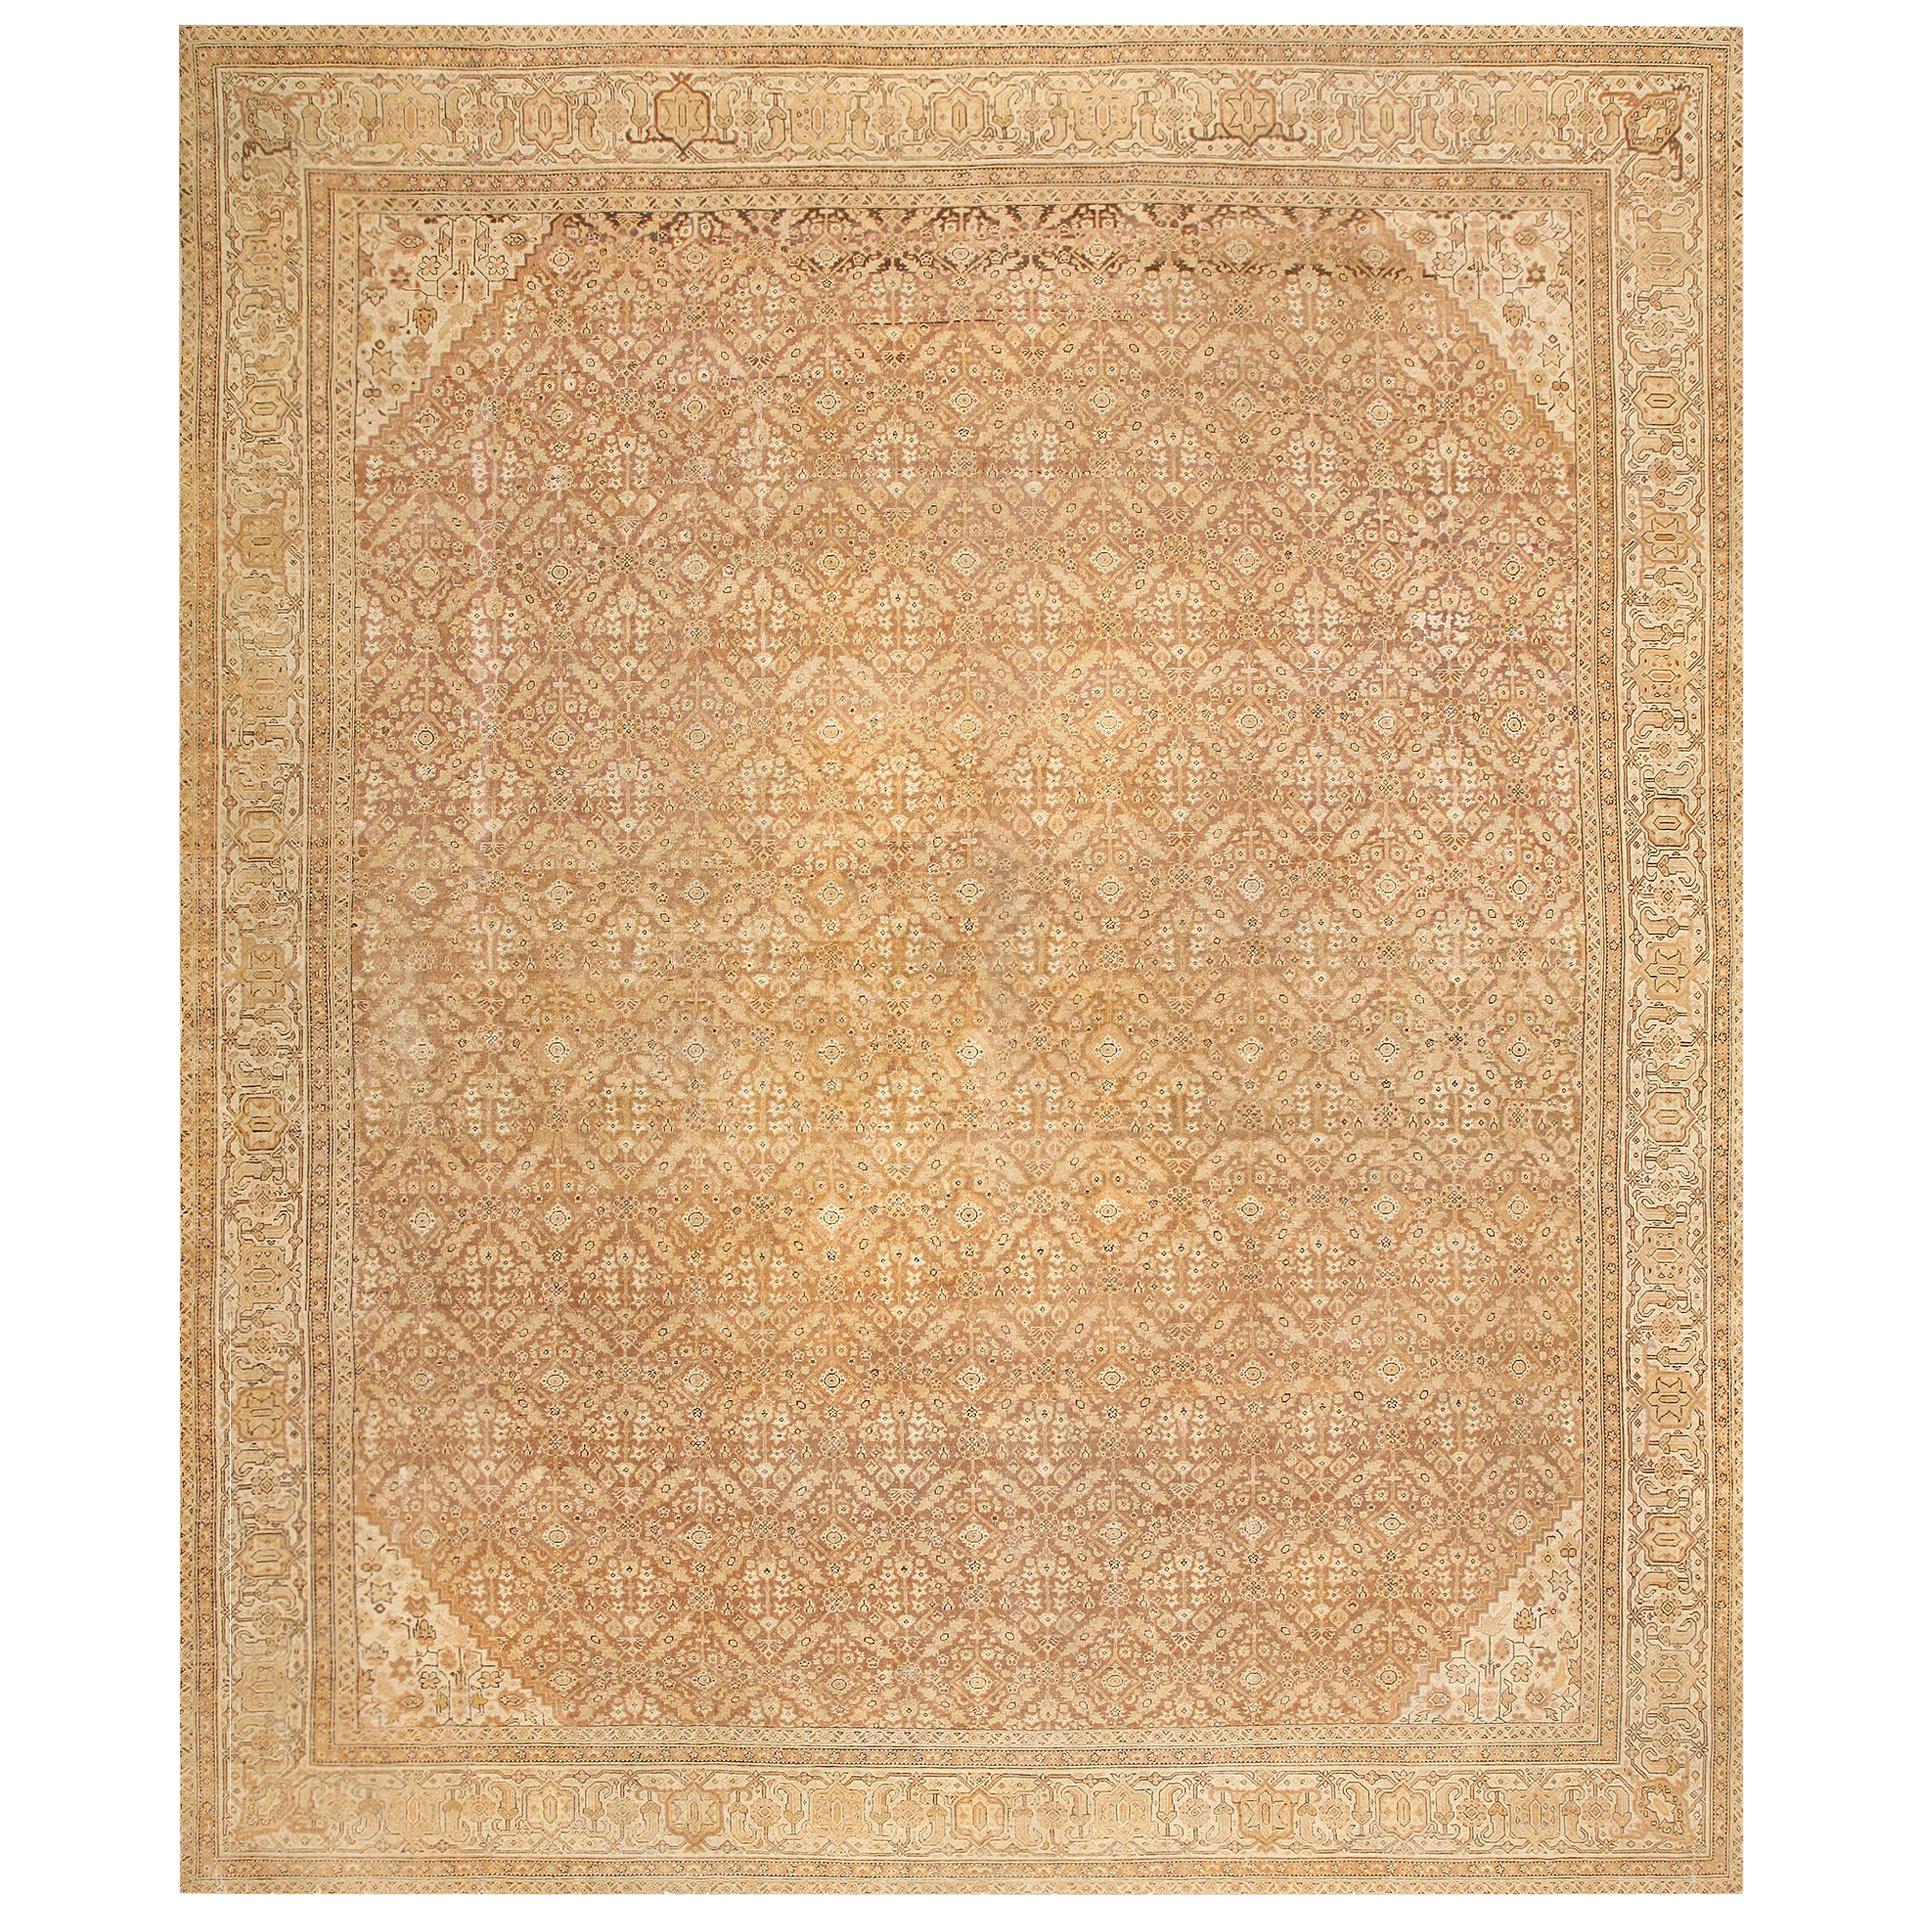 Antique Indian Amritsar Rug. Size: 12 ft 6 in x 14 ft 10 in For Sale